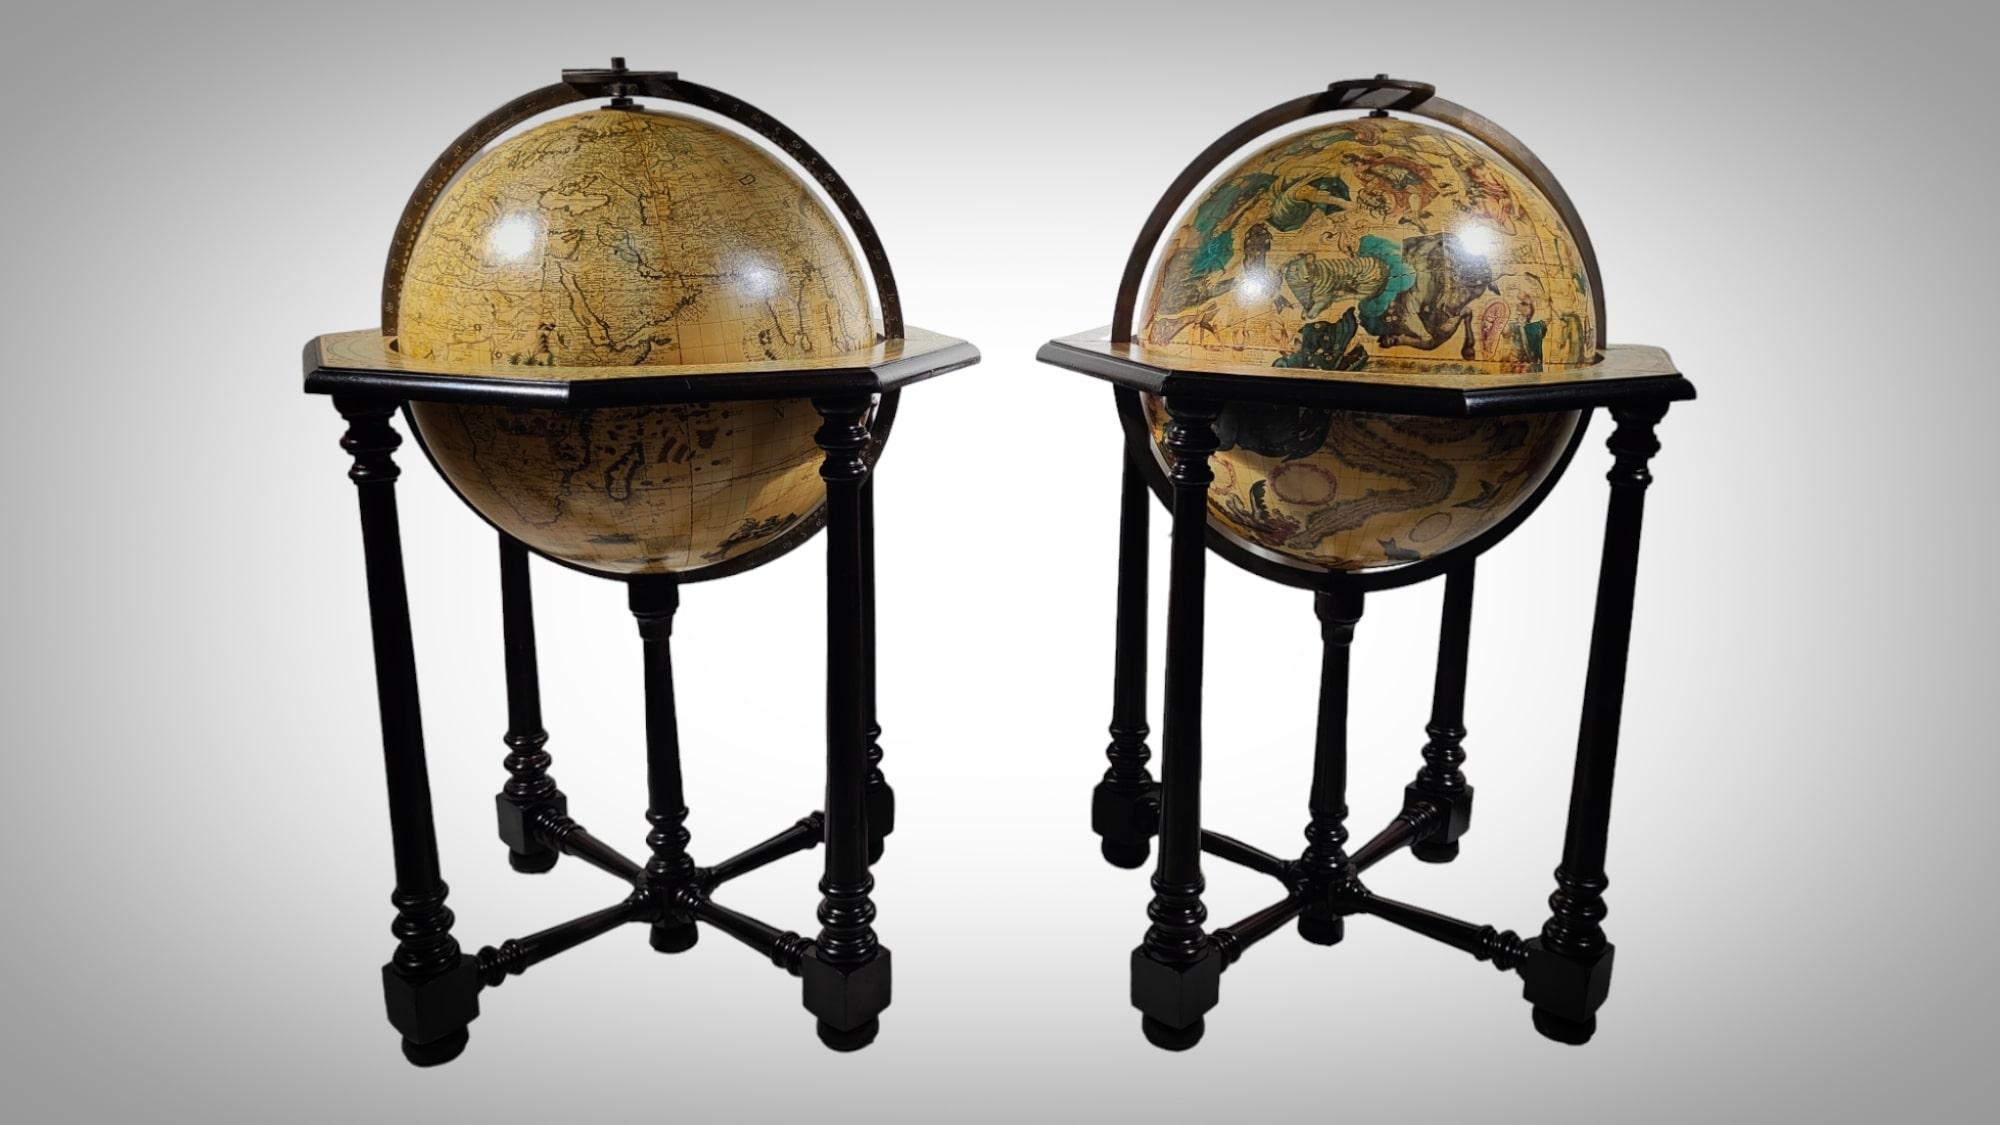 Pair Of Large Antique Italian Globes 
Large pair of terrestrial and celestial globes from Italy 1940s. The globes are in good condition except for normal use and the passage of time. The base is made of ebonised wood. The meridian circles and hands